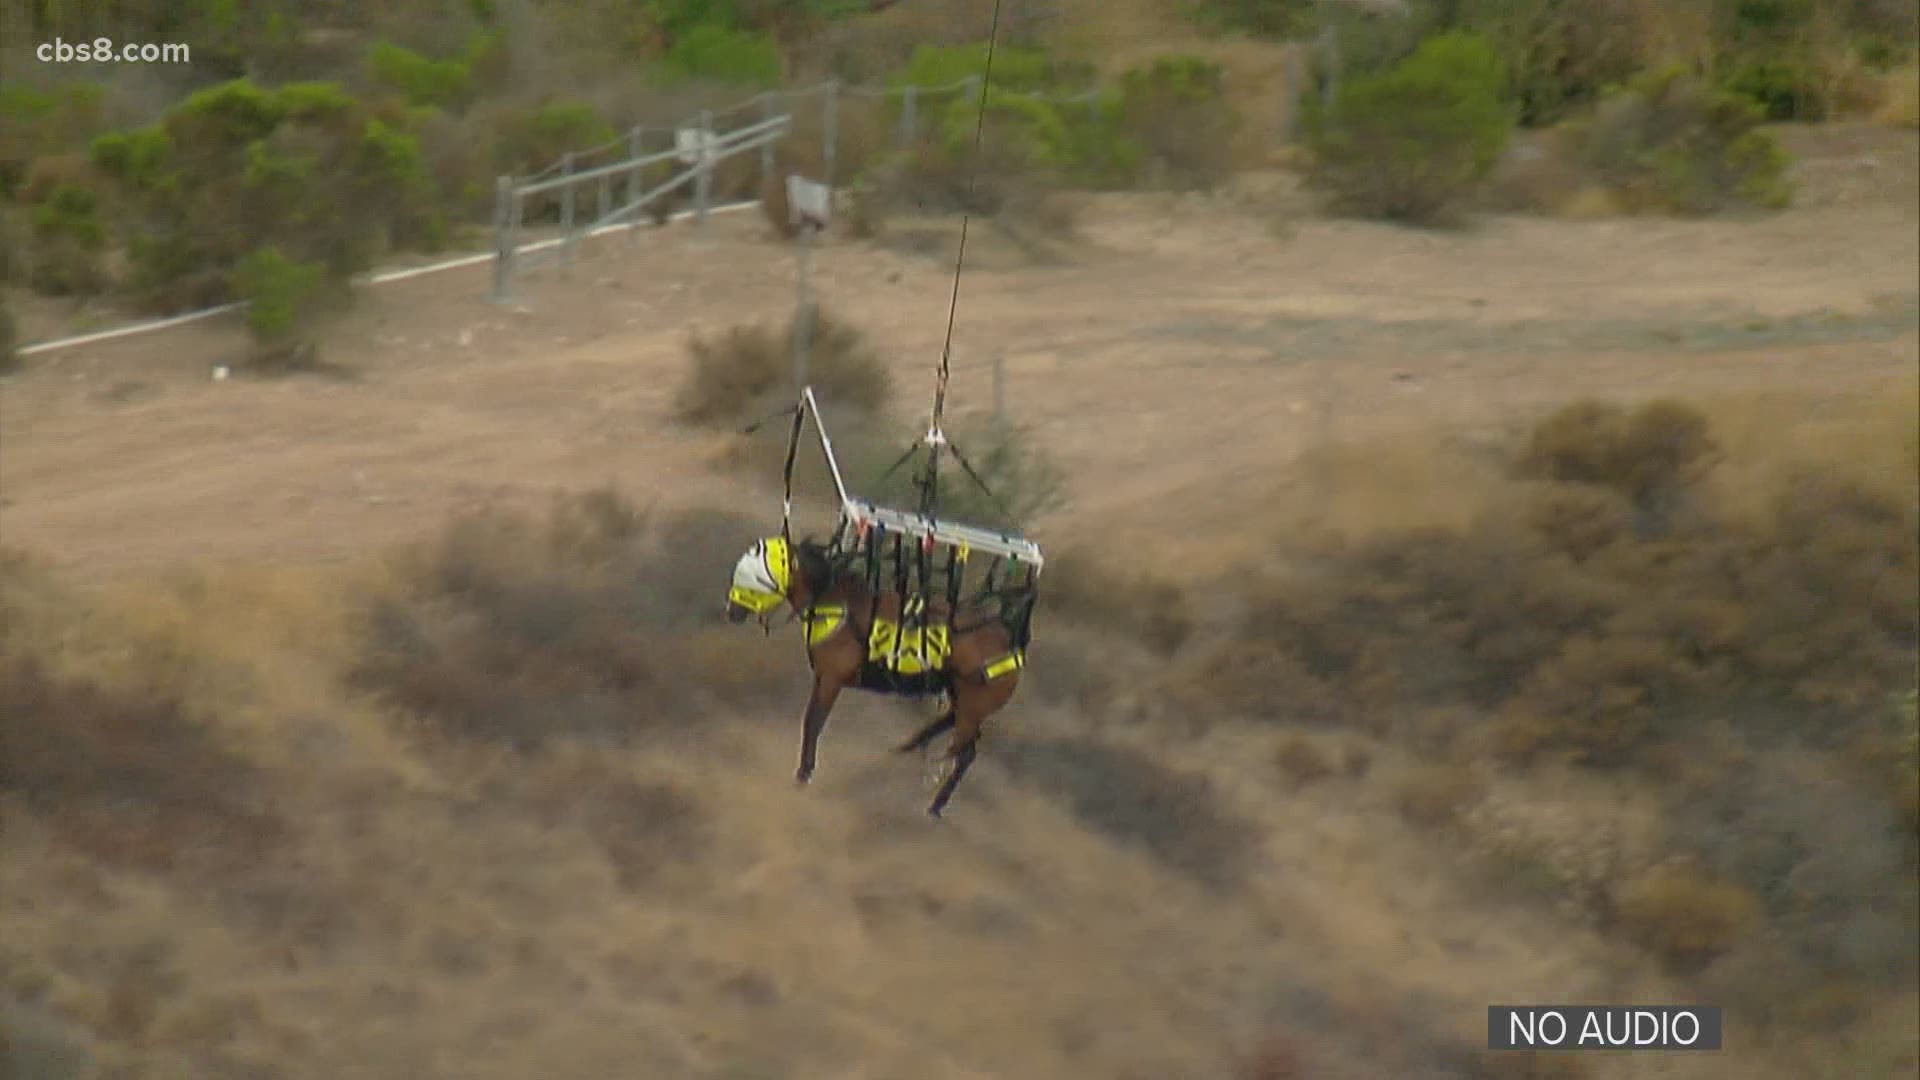 Firefighters and veterinarians are working to rescue a horse and rider who fell off a steep trail down an embankment